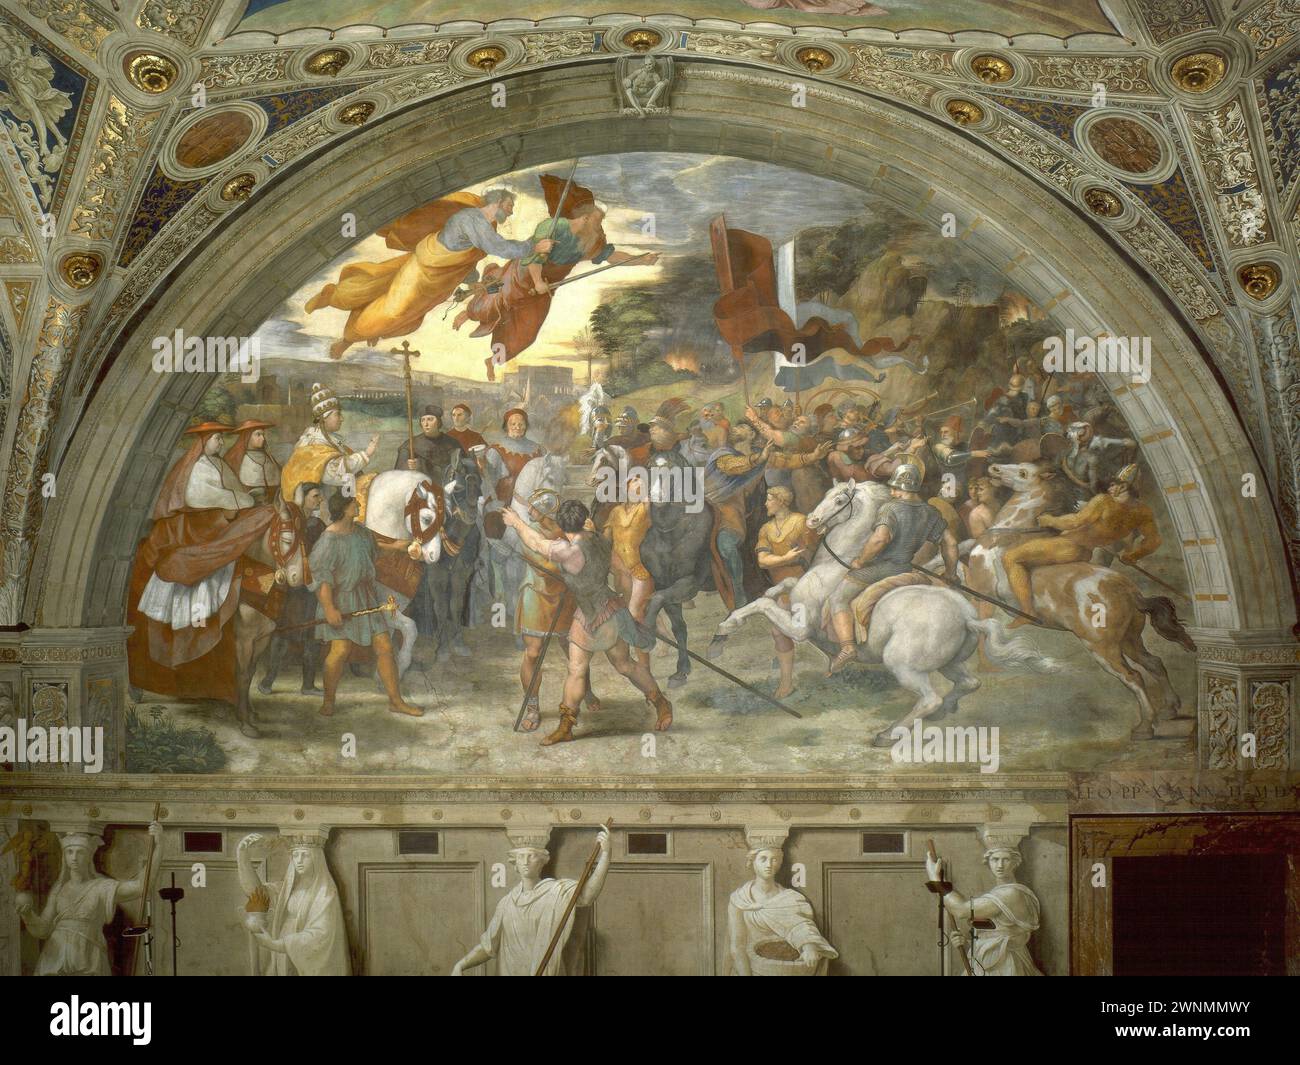 The Meeting of Leo I and Attila is a fresco by the Italian Renaissance artist Raphael. It was painted from 1513 to 1514 ,  Stanze di Raffaello, in the Apostolic Palace in the Vatican. It is located in the Stanza di Eliodoro, which is named after The Expulsion of Heliodorus from the Temple. Stock Photo